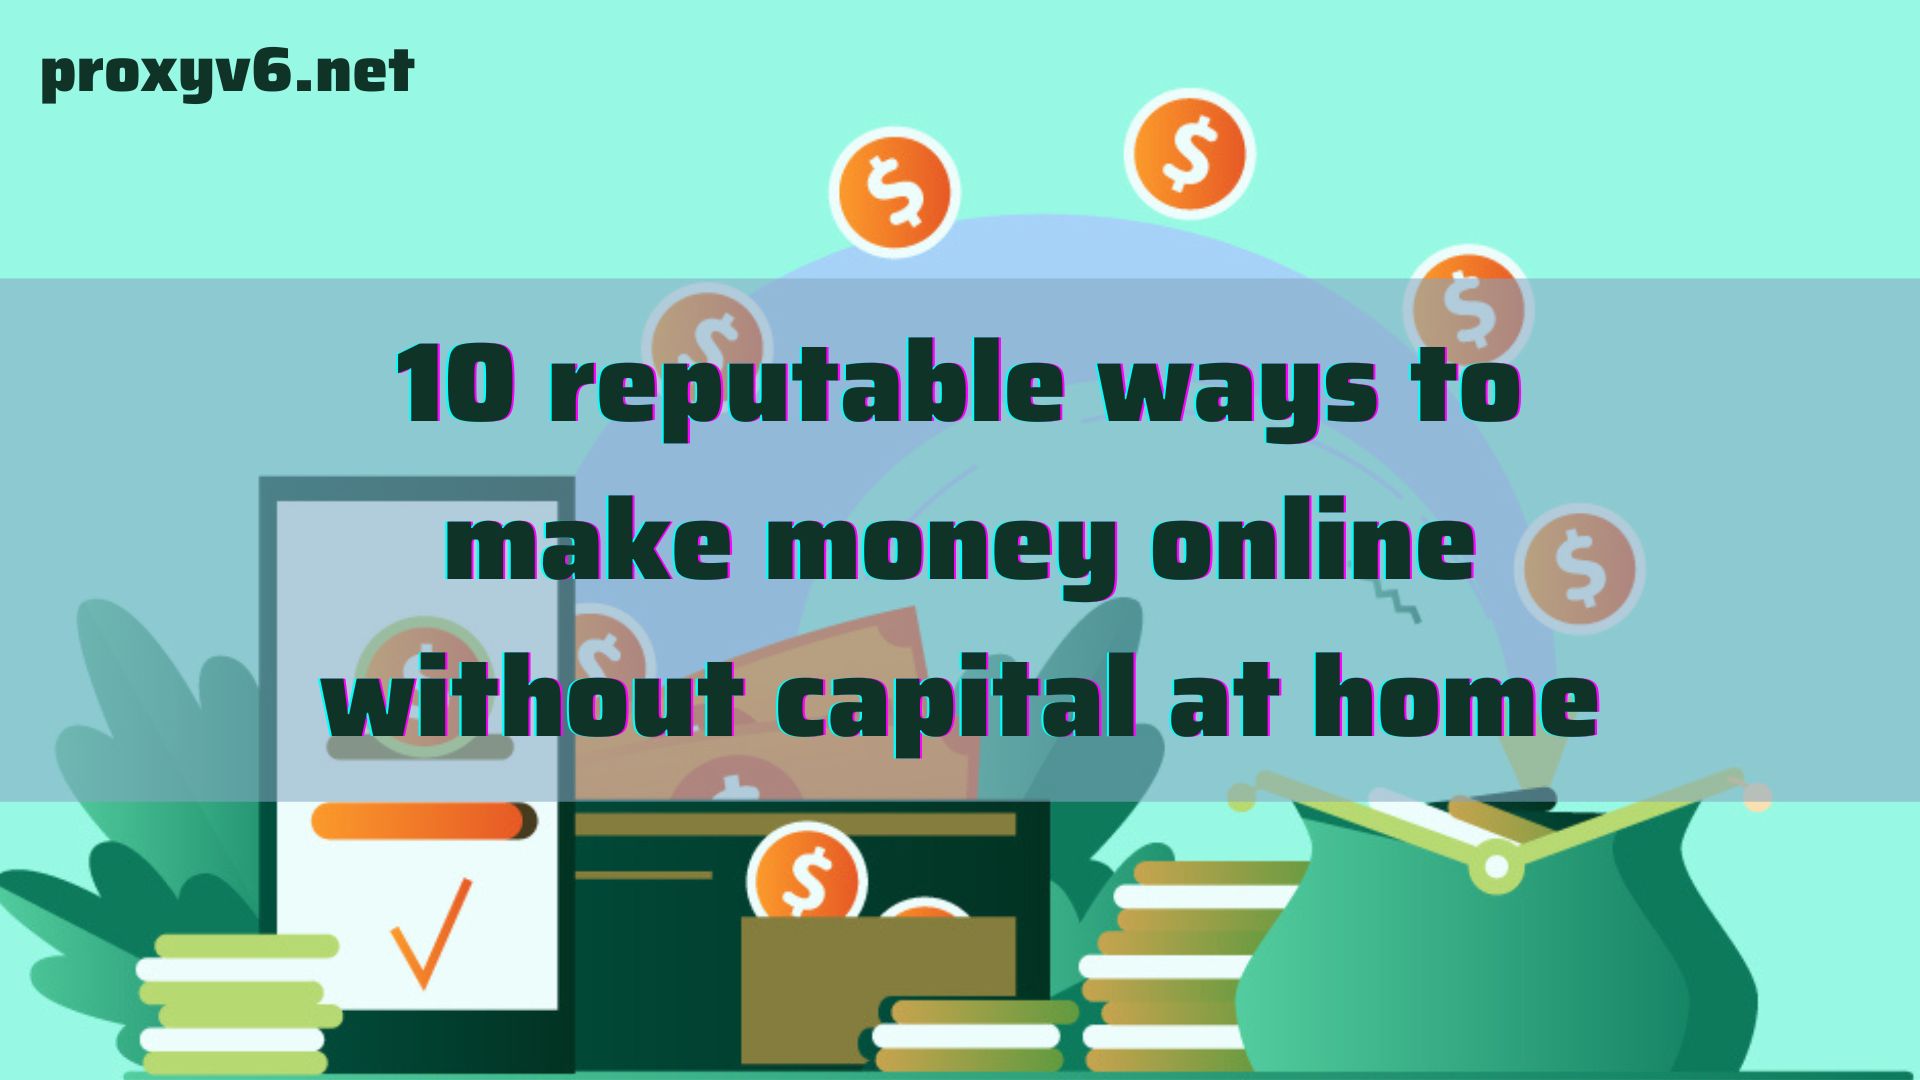 10 reputable ways to make money online without capital at home